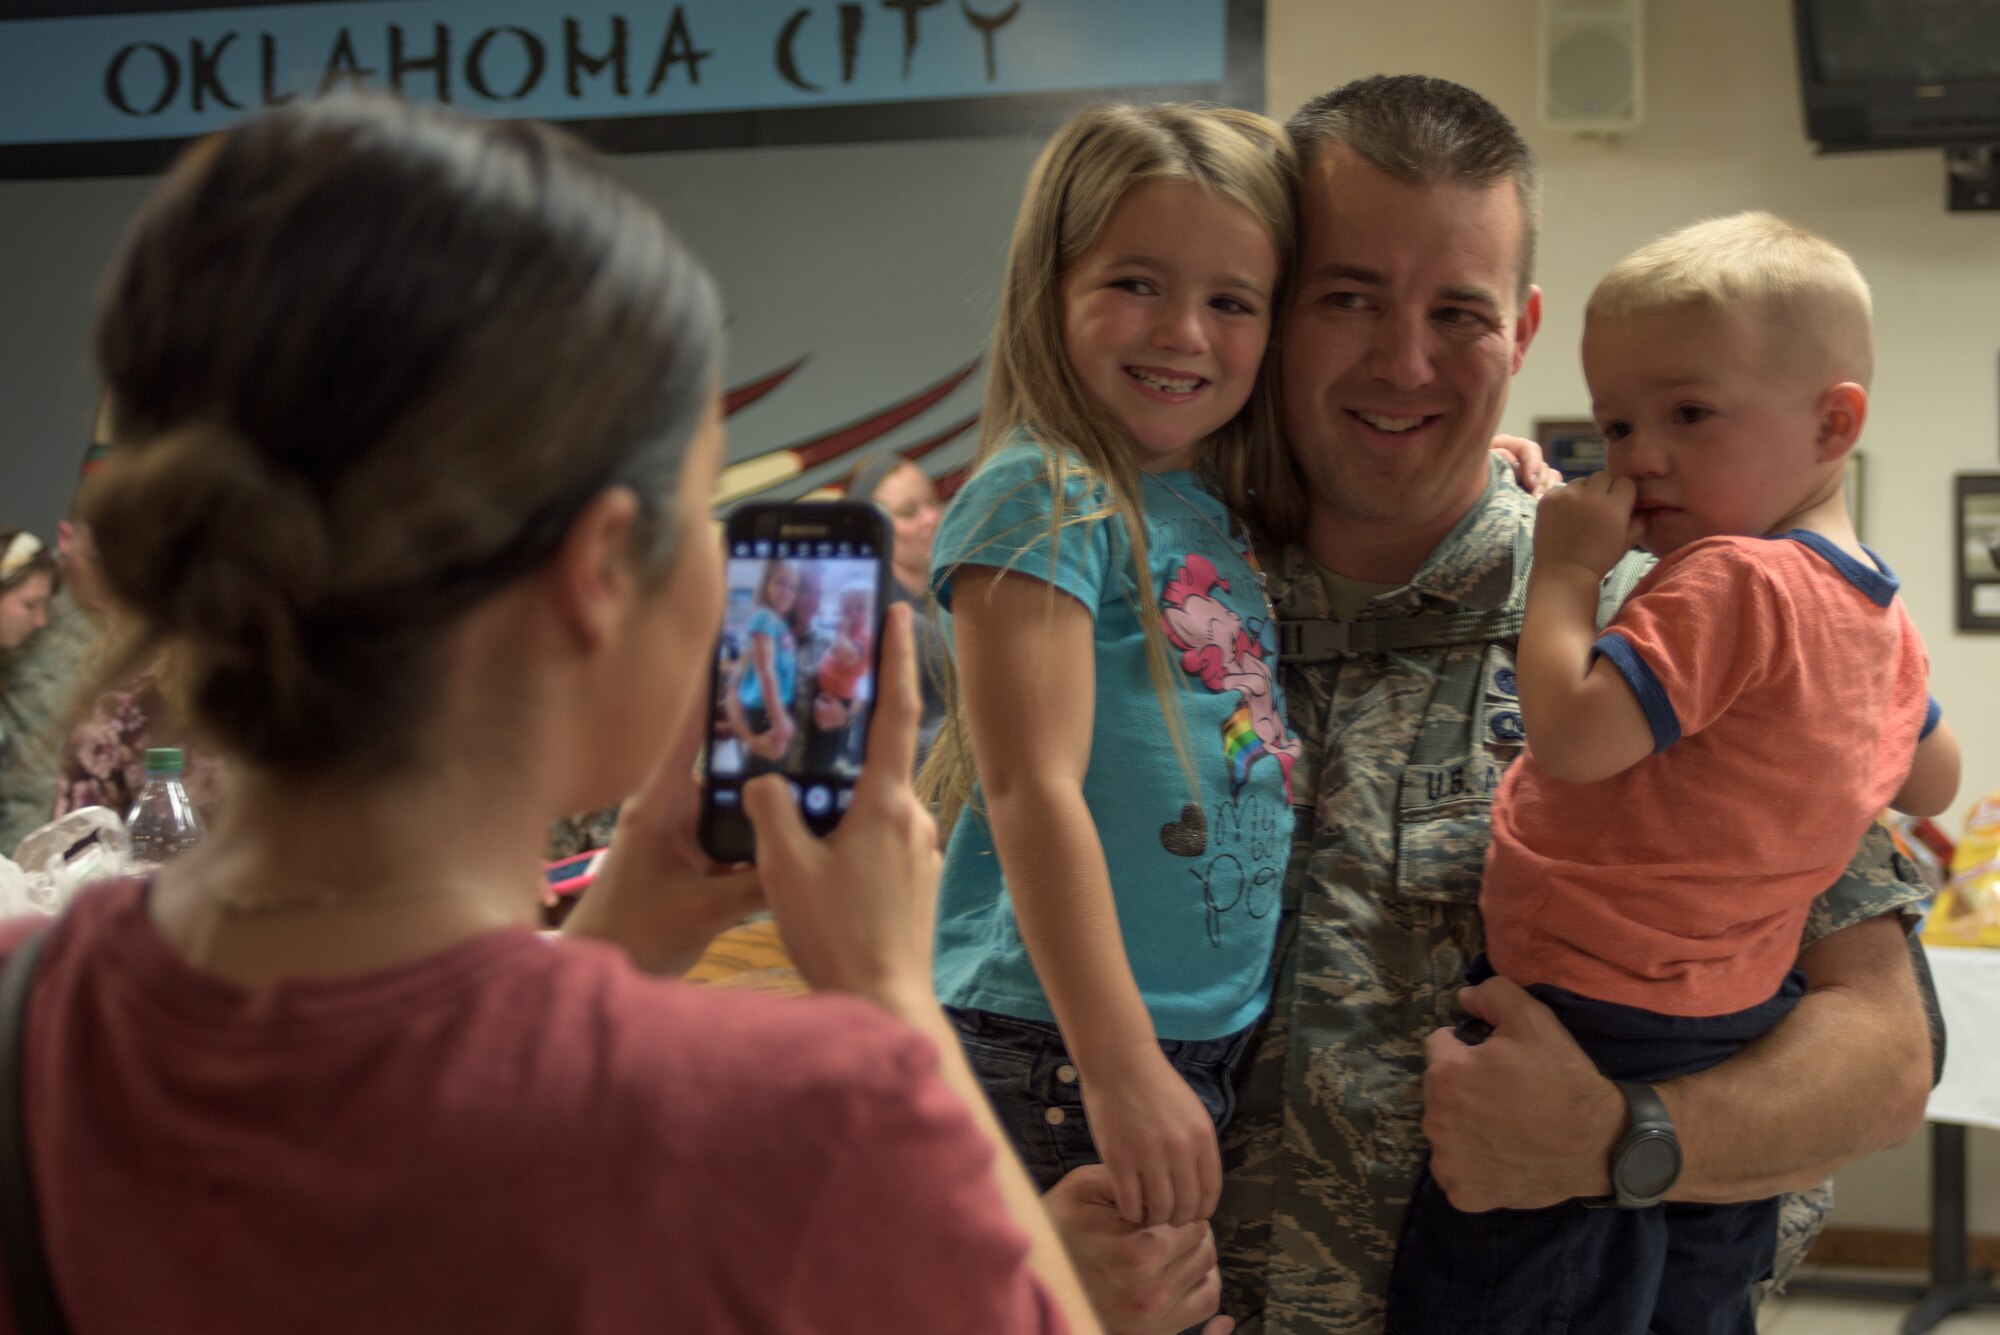 Tech. Sgt. Stephen Strong assigned to the 137th Special Operations Force Support Squadron, poses for a photo with his children prior to deploying in support of Operation Freedom's Sentinel, Will Rogers Air National Guard Base, October 19, 2016. Strong is one of over 140 Airmen who will deploy from WRANGB to Southwest Asia, the first major deployment for the 137 SOW as a special operations wing. (U.S. Air National Guard photo by Tech. Sgt. Caroline Essex)